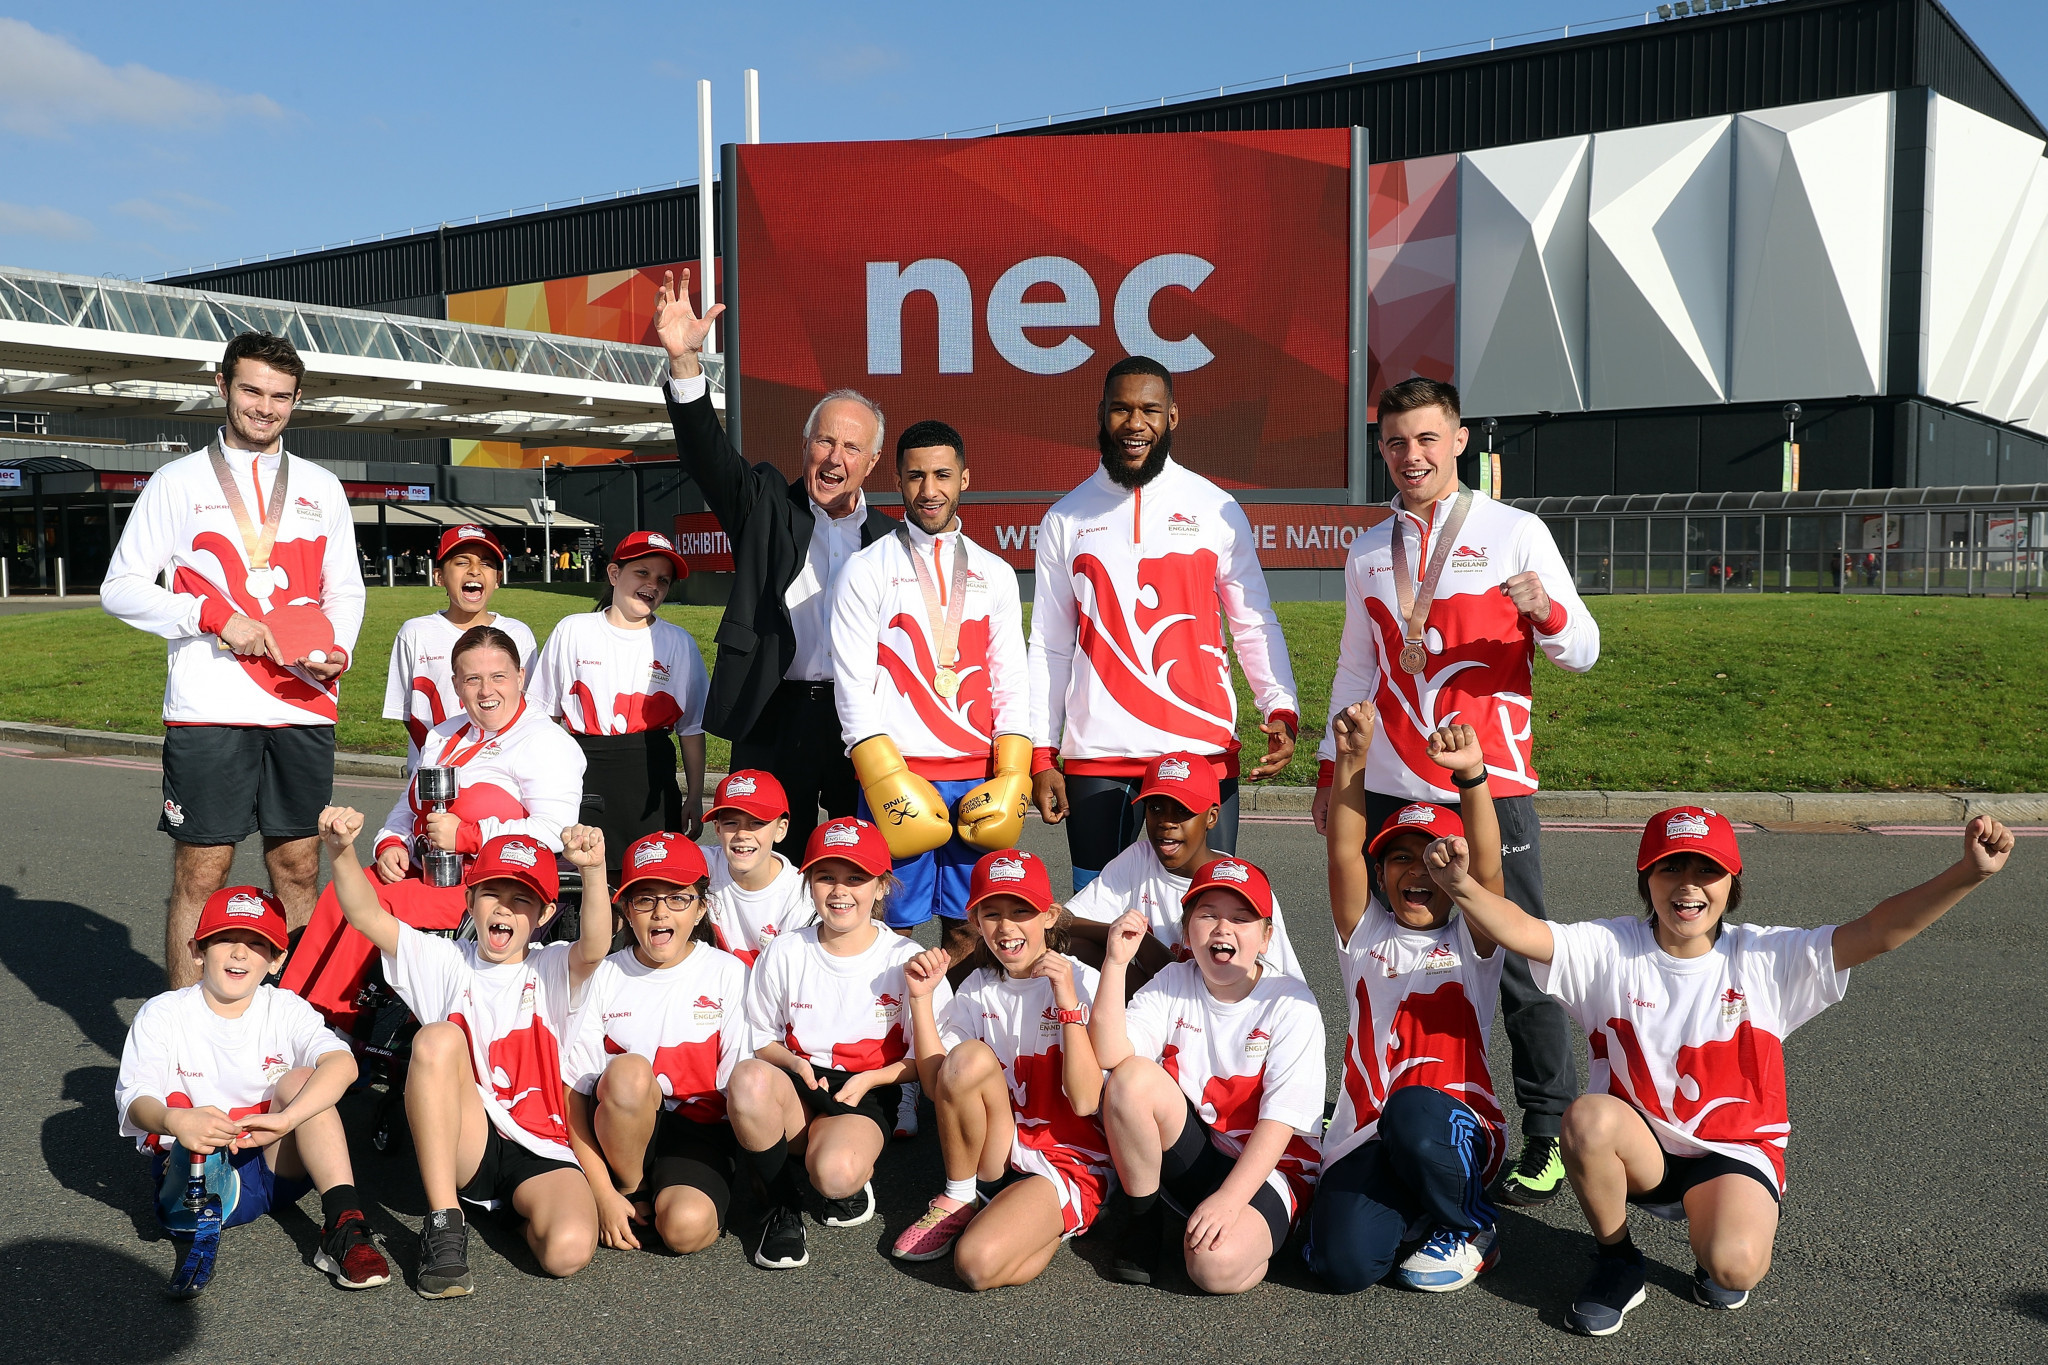 Birmingham 2022 chairman John Crabtree was joined at today's event by English Commonwealth Games medallists and pupils from Mapledene Primary School ©Birmingham 2022